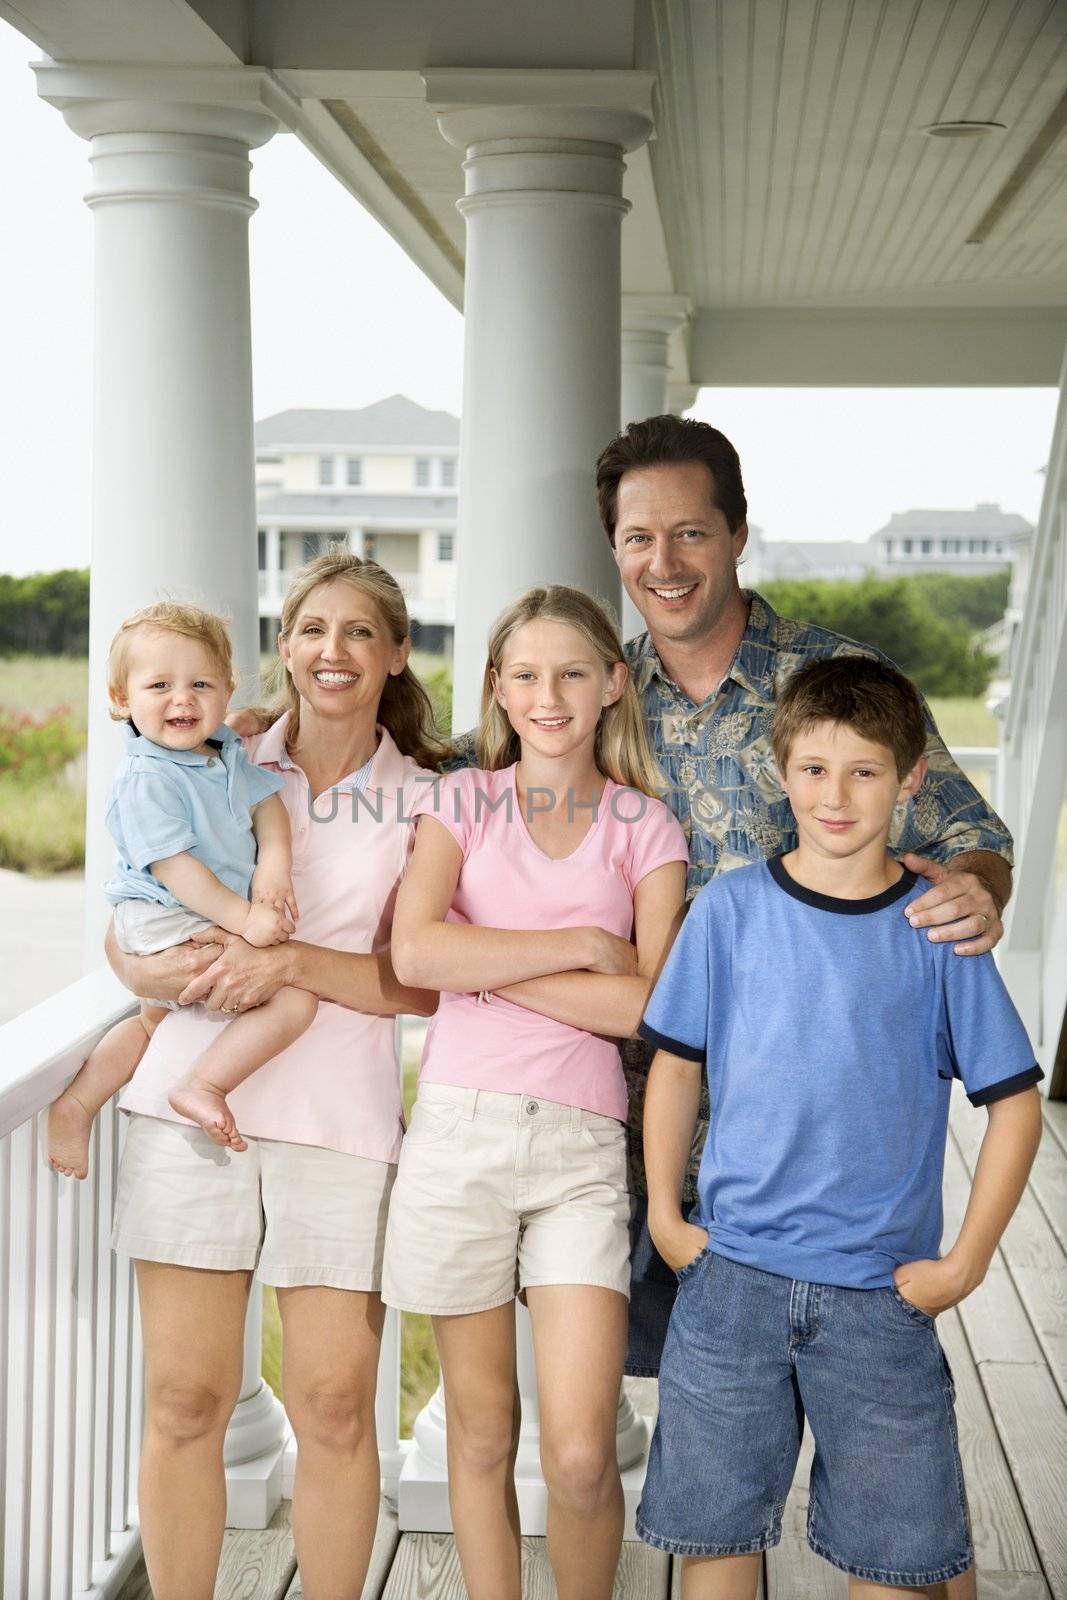 Family portrait of Caucasian mid-adult man and woman with pre-teen girl and boy and male toddler, standing on porch.